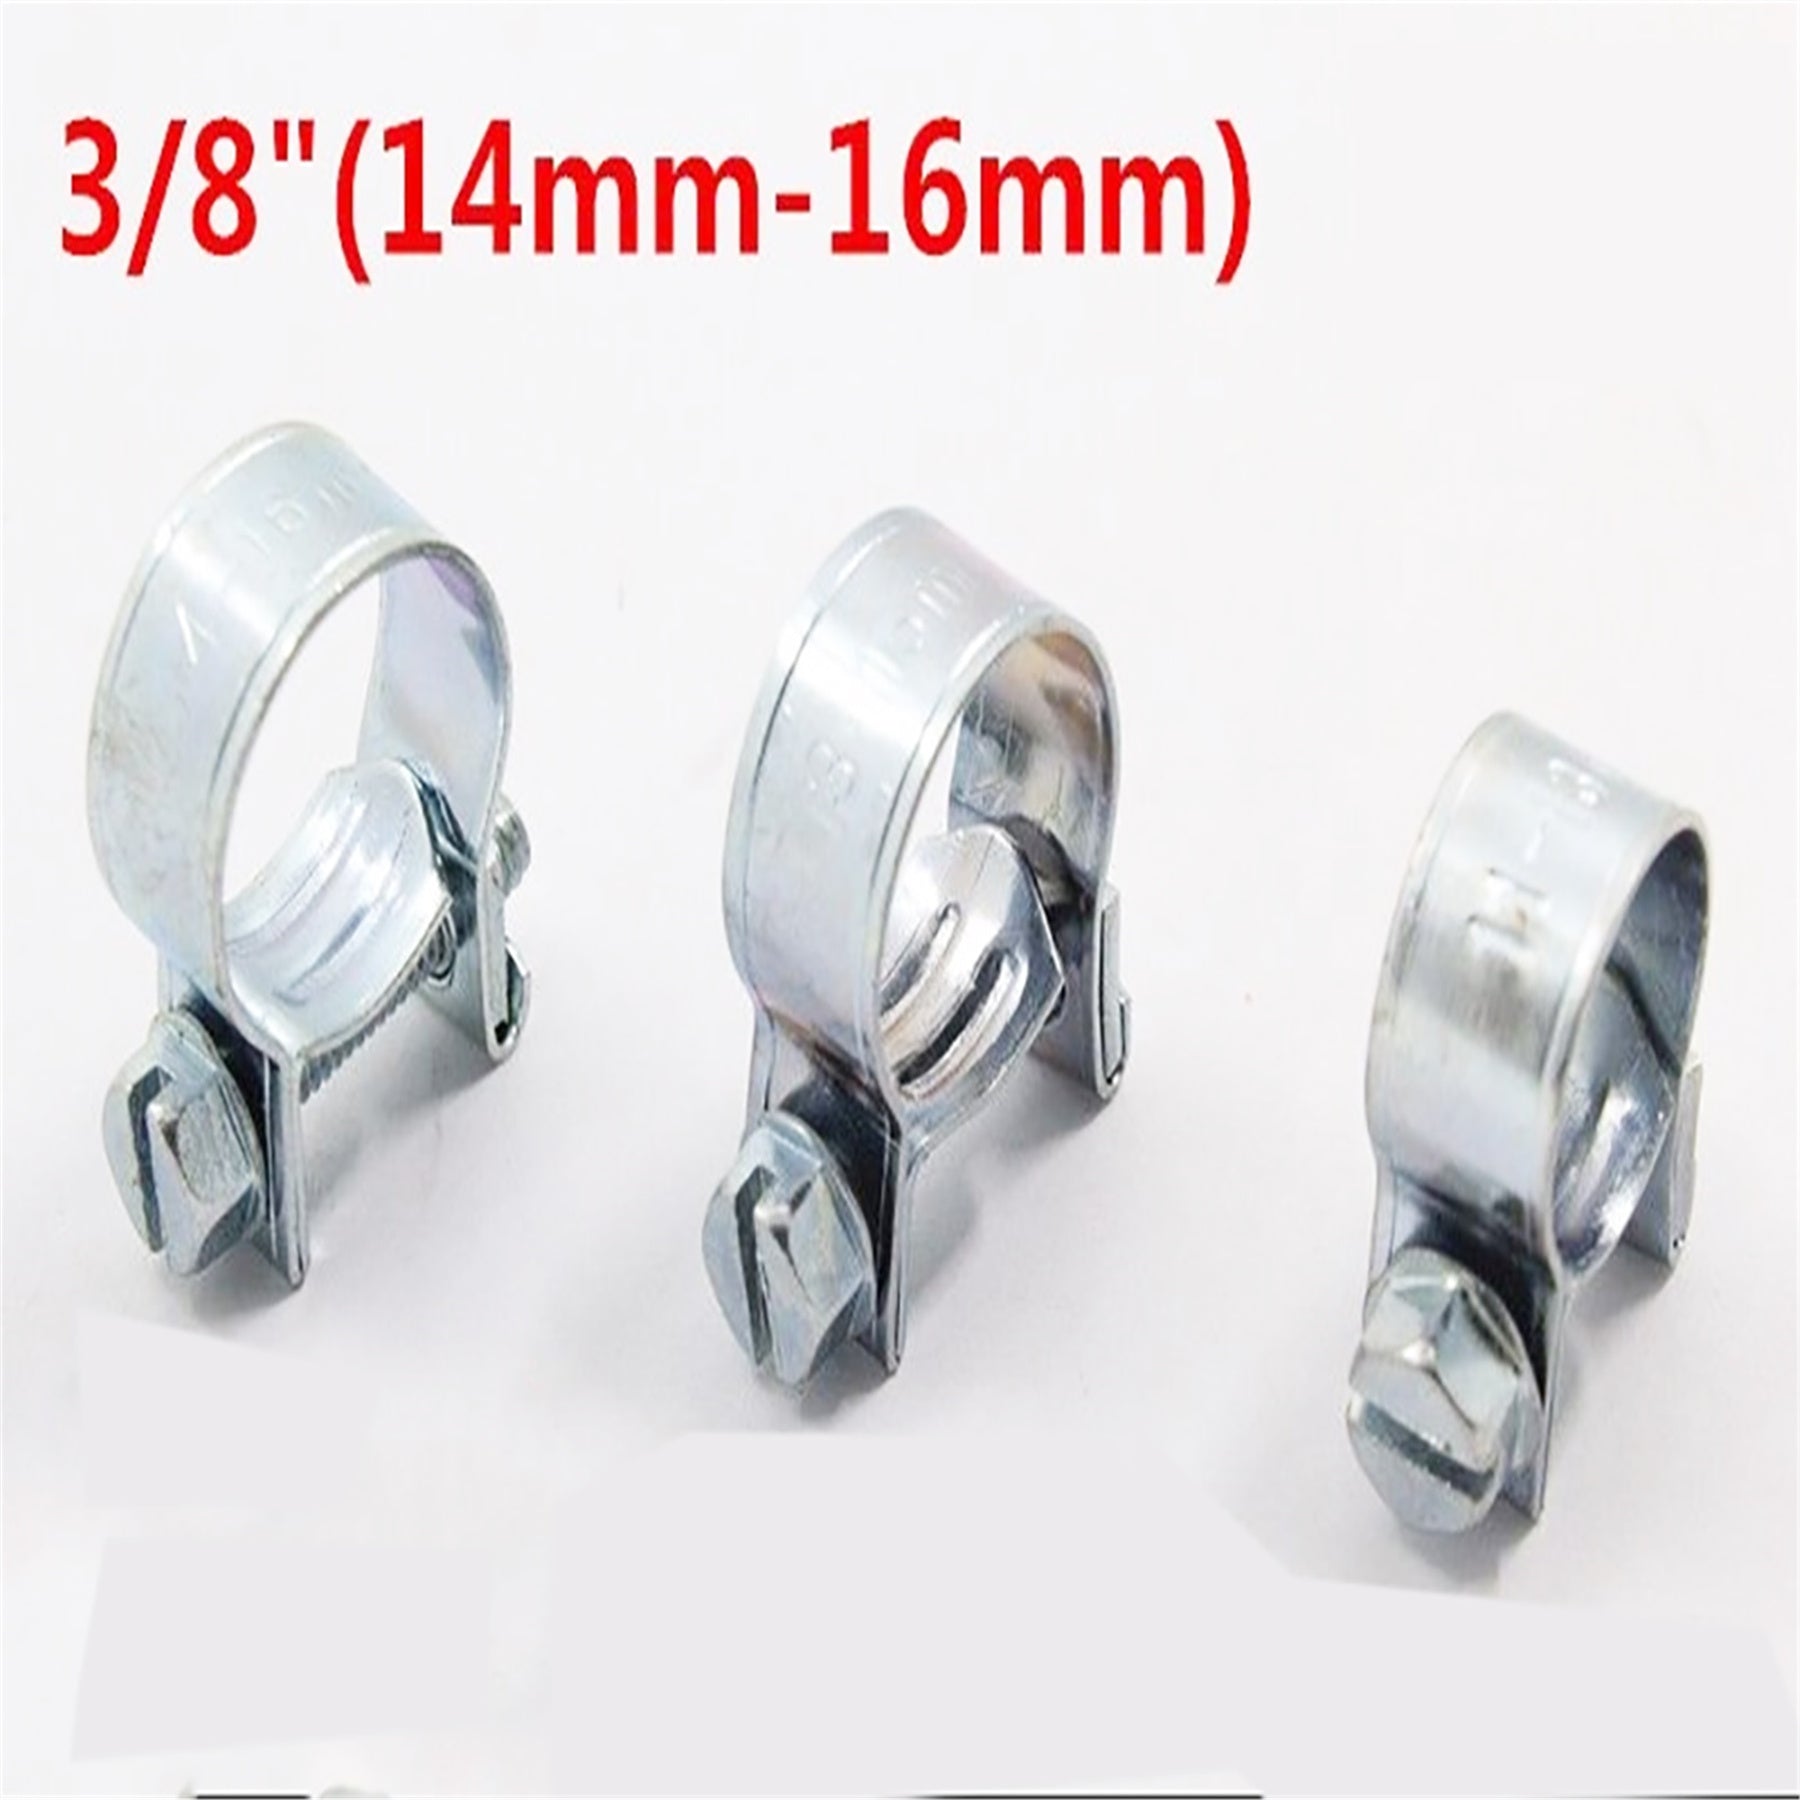 30PCS 3/8"FUEL INJECTION HOSE CLAMP / AUTO Fuel Clamps （14mm-16mm） FINDMALLPARTS